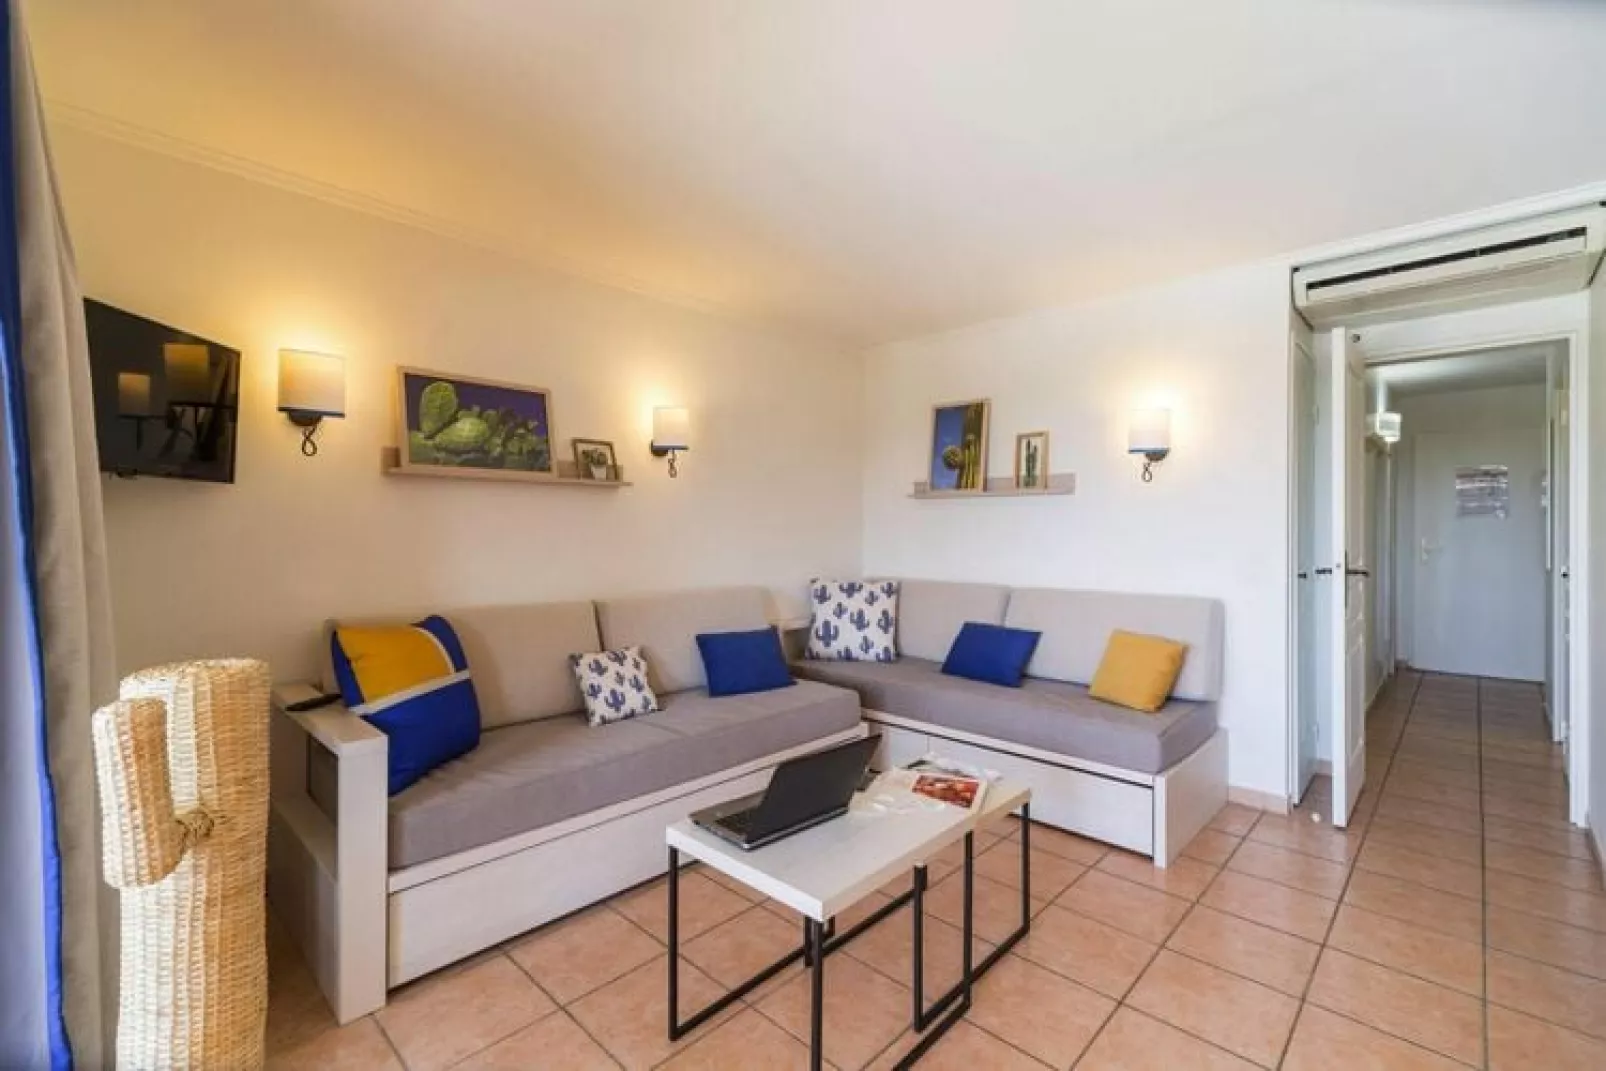 Residence Les Calanques, Les Issambres-14 Standard - Studio 4 p. - 1 sleeping alcove-Woonkamer